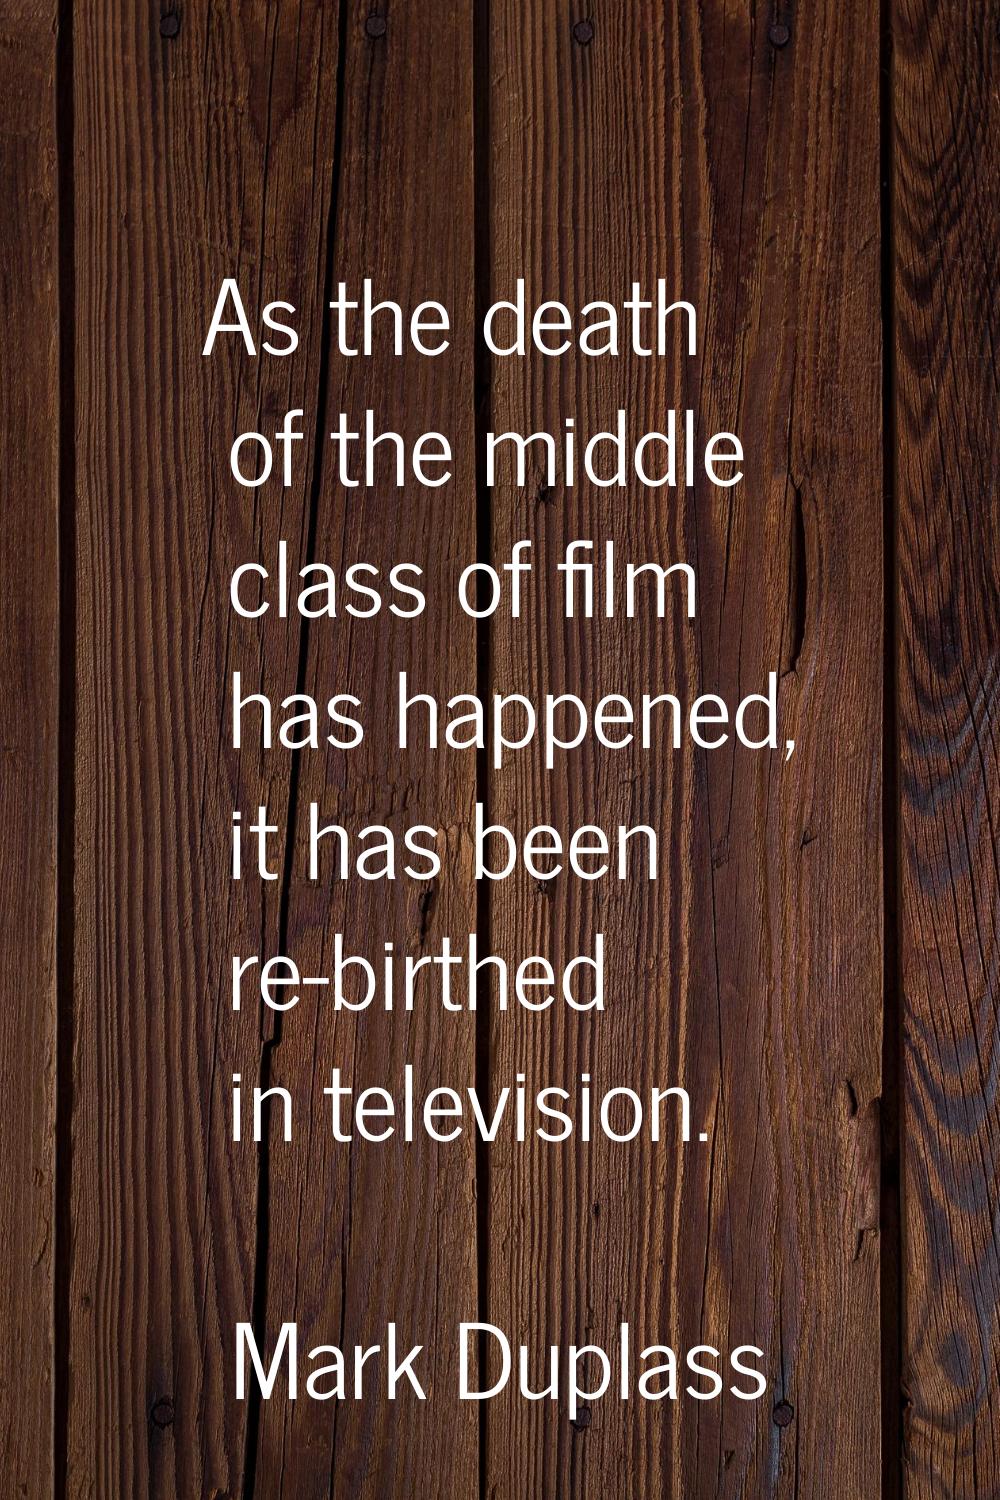 As the death of the middle class of film has happened, it has been re-birthed in television.